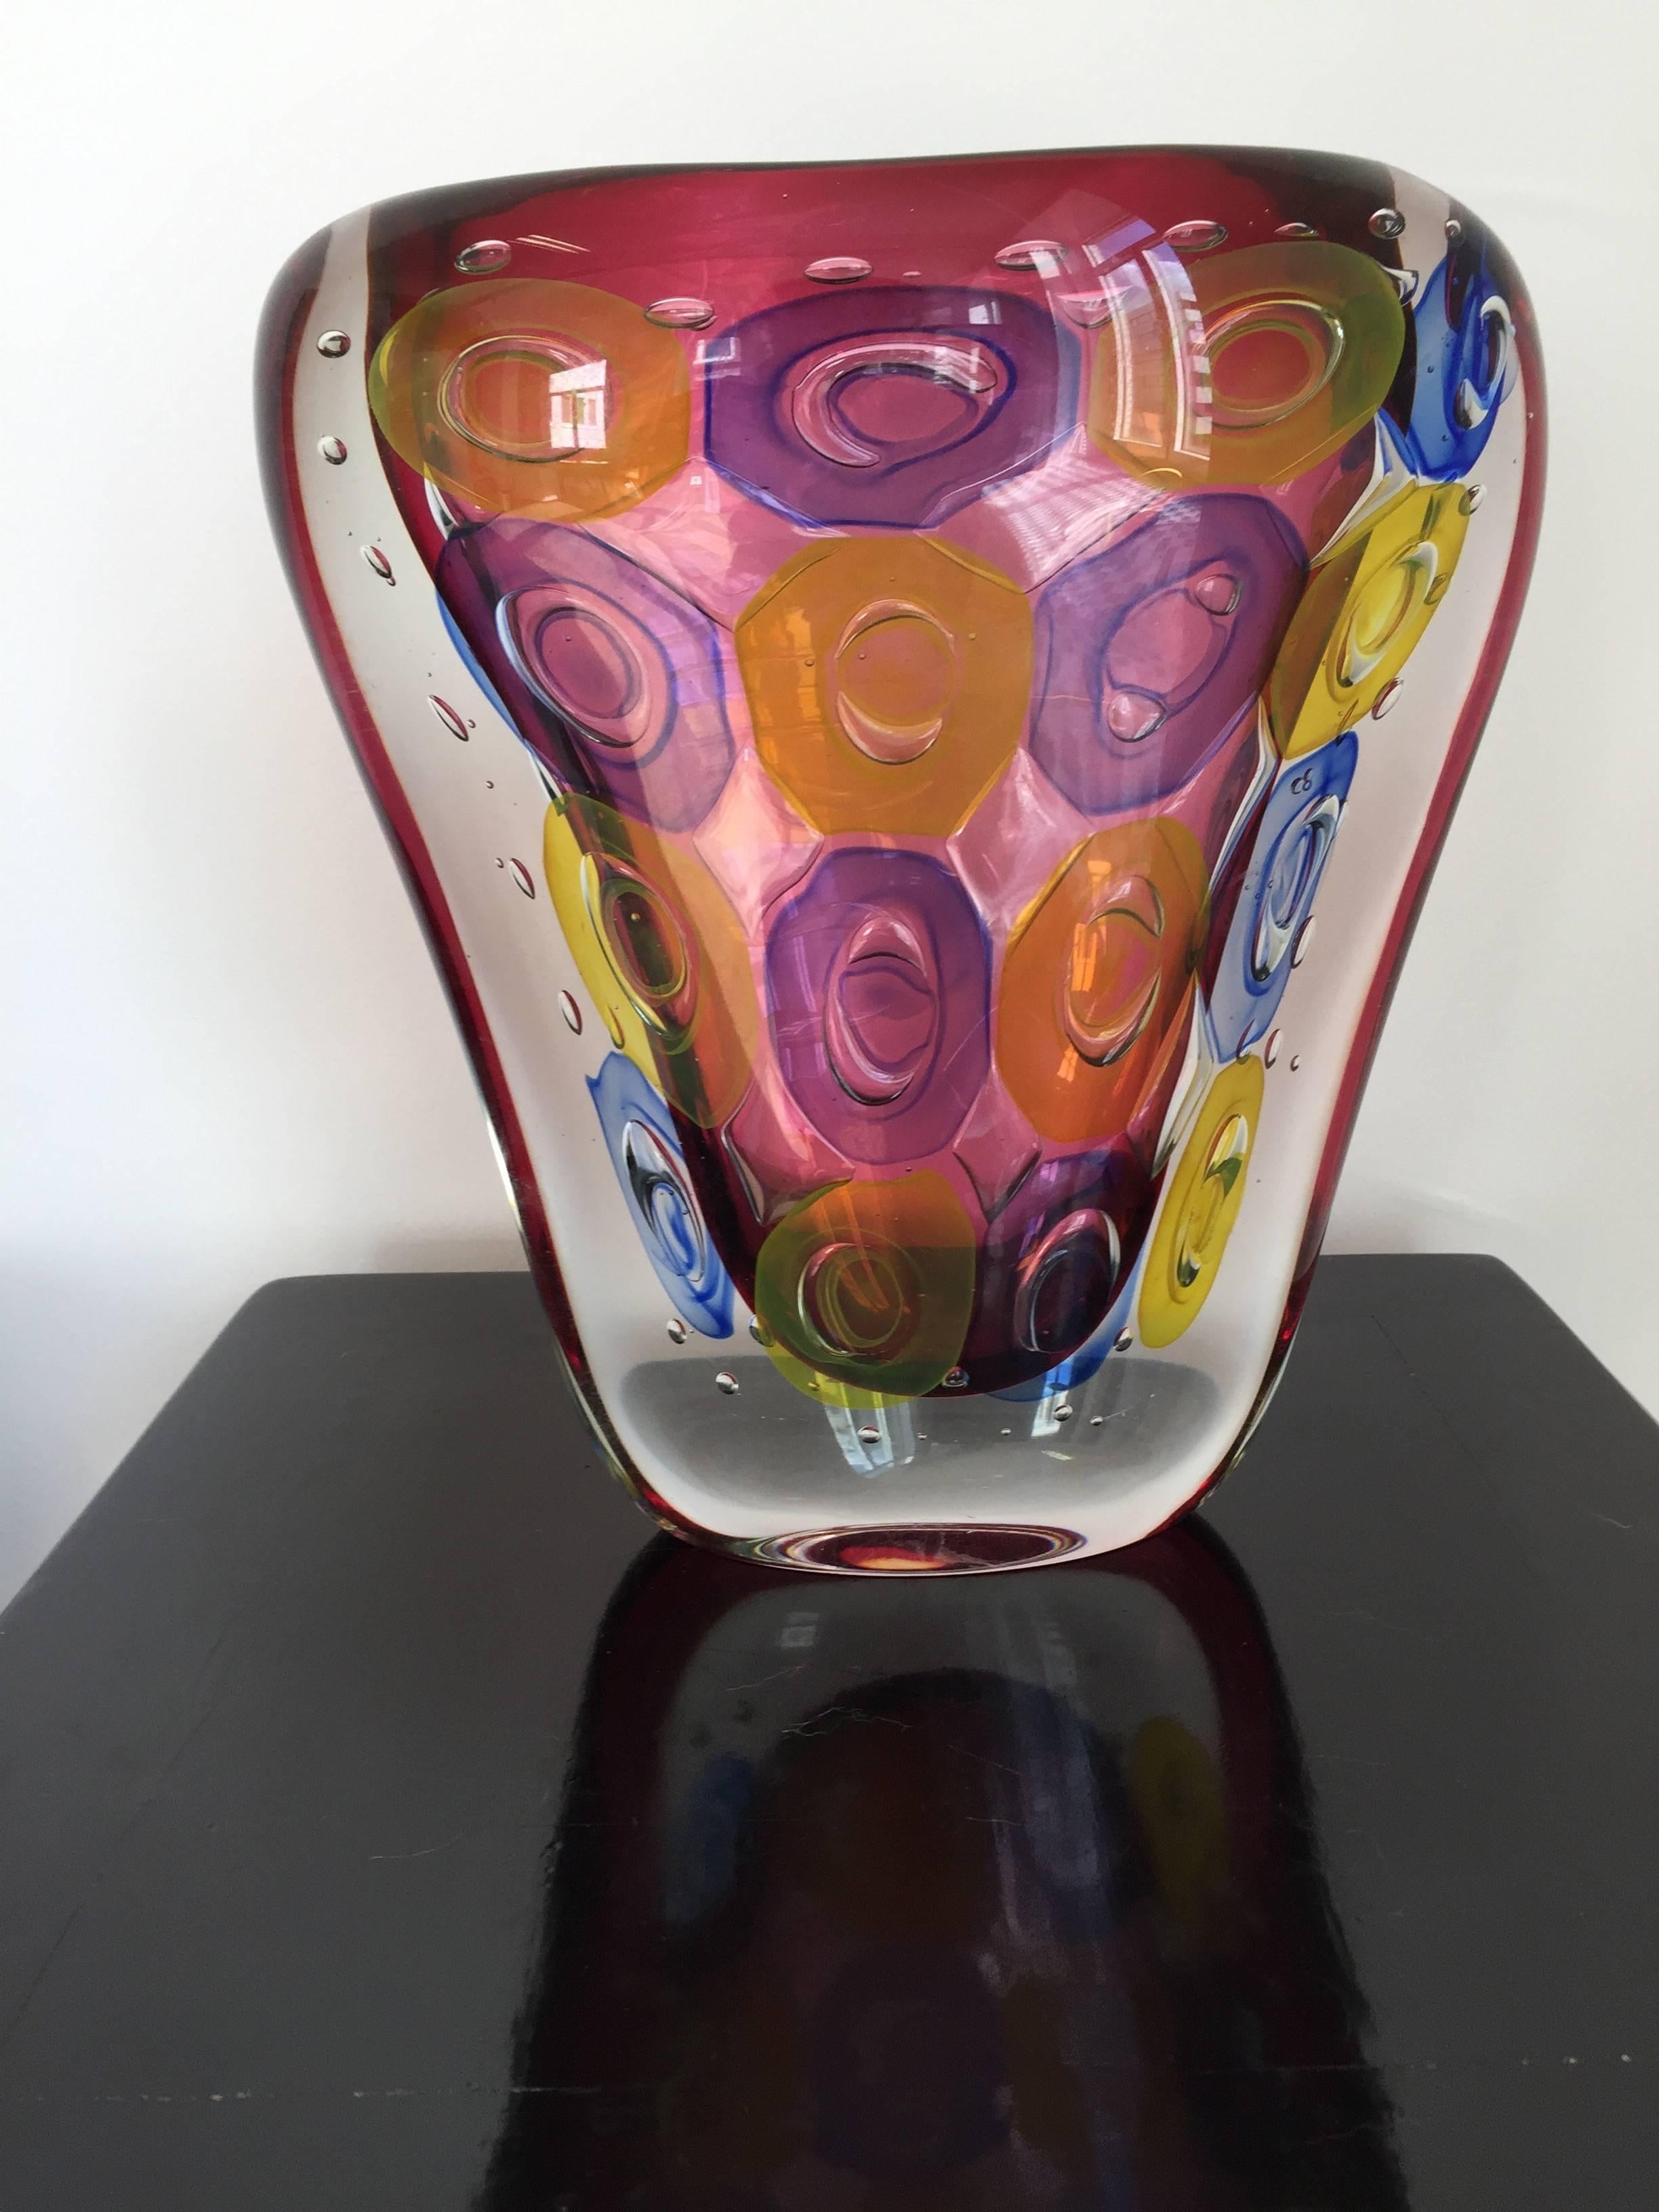 Anelly vase, crystal by Luigi Onesto Sommerso technique, oval shape, size 29 H x 25 W x 9 D cm,
signed on the bottom L. Onesto Murano, the main color is a light vine red with yellow and blue ornaments.